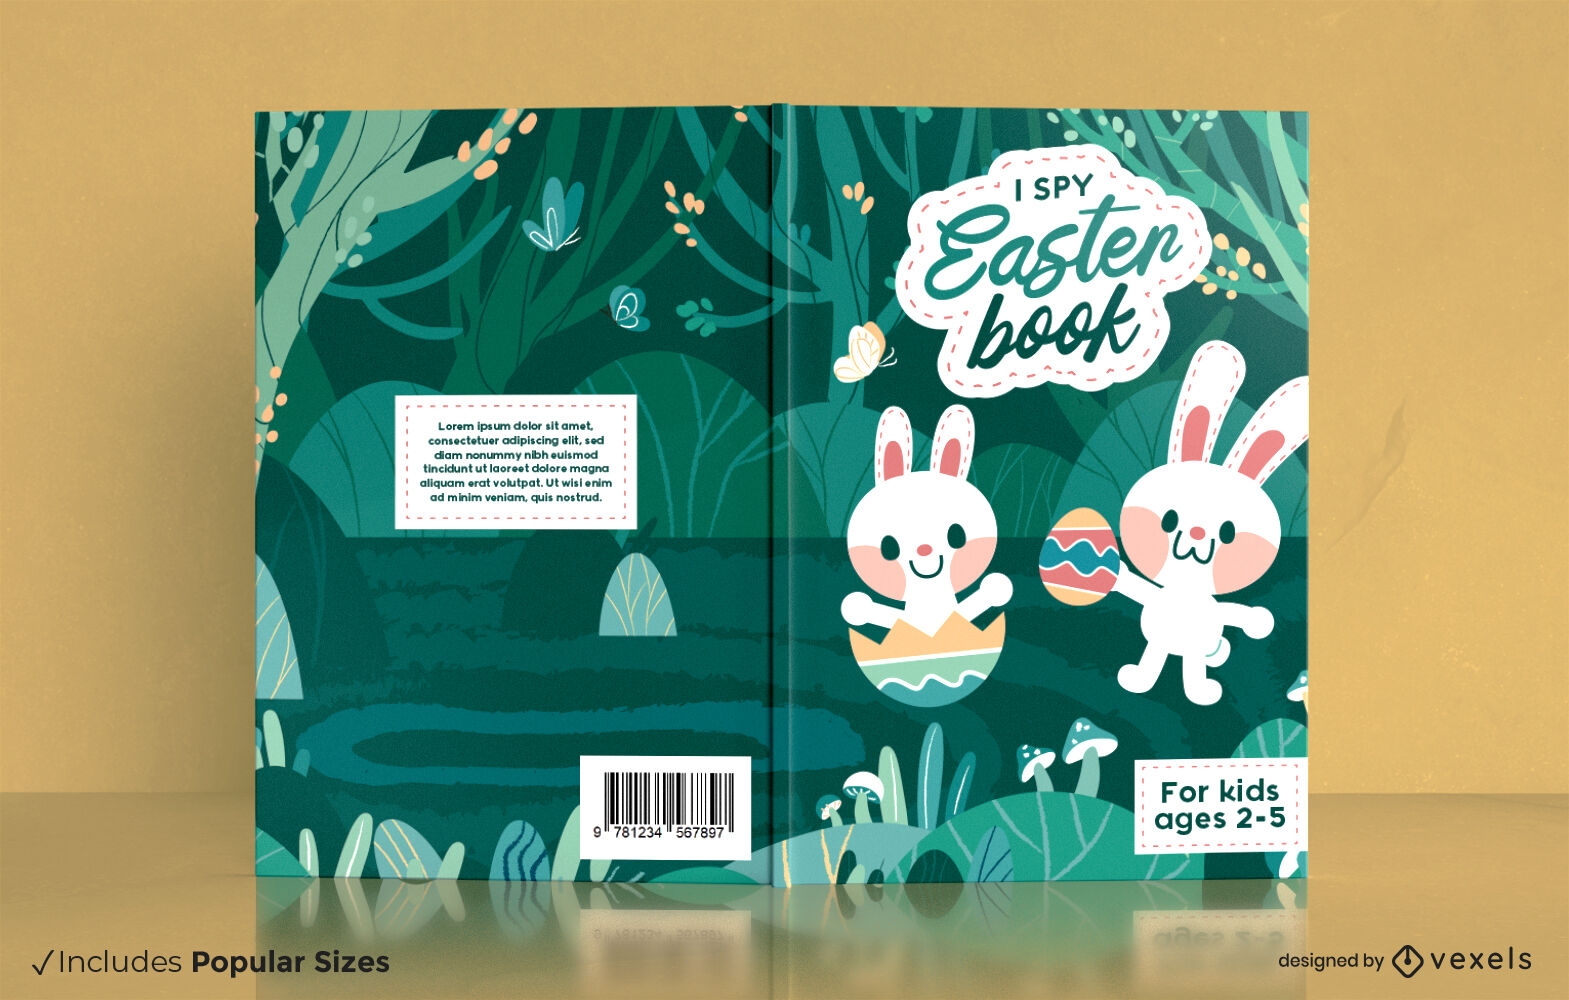 Easter bunny and eggs book cover design